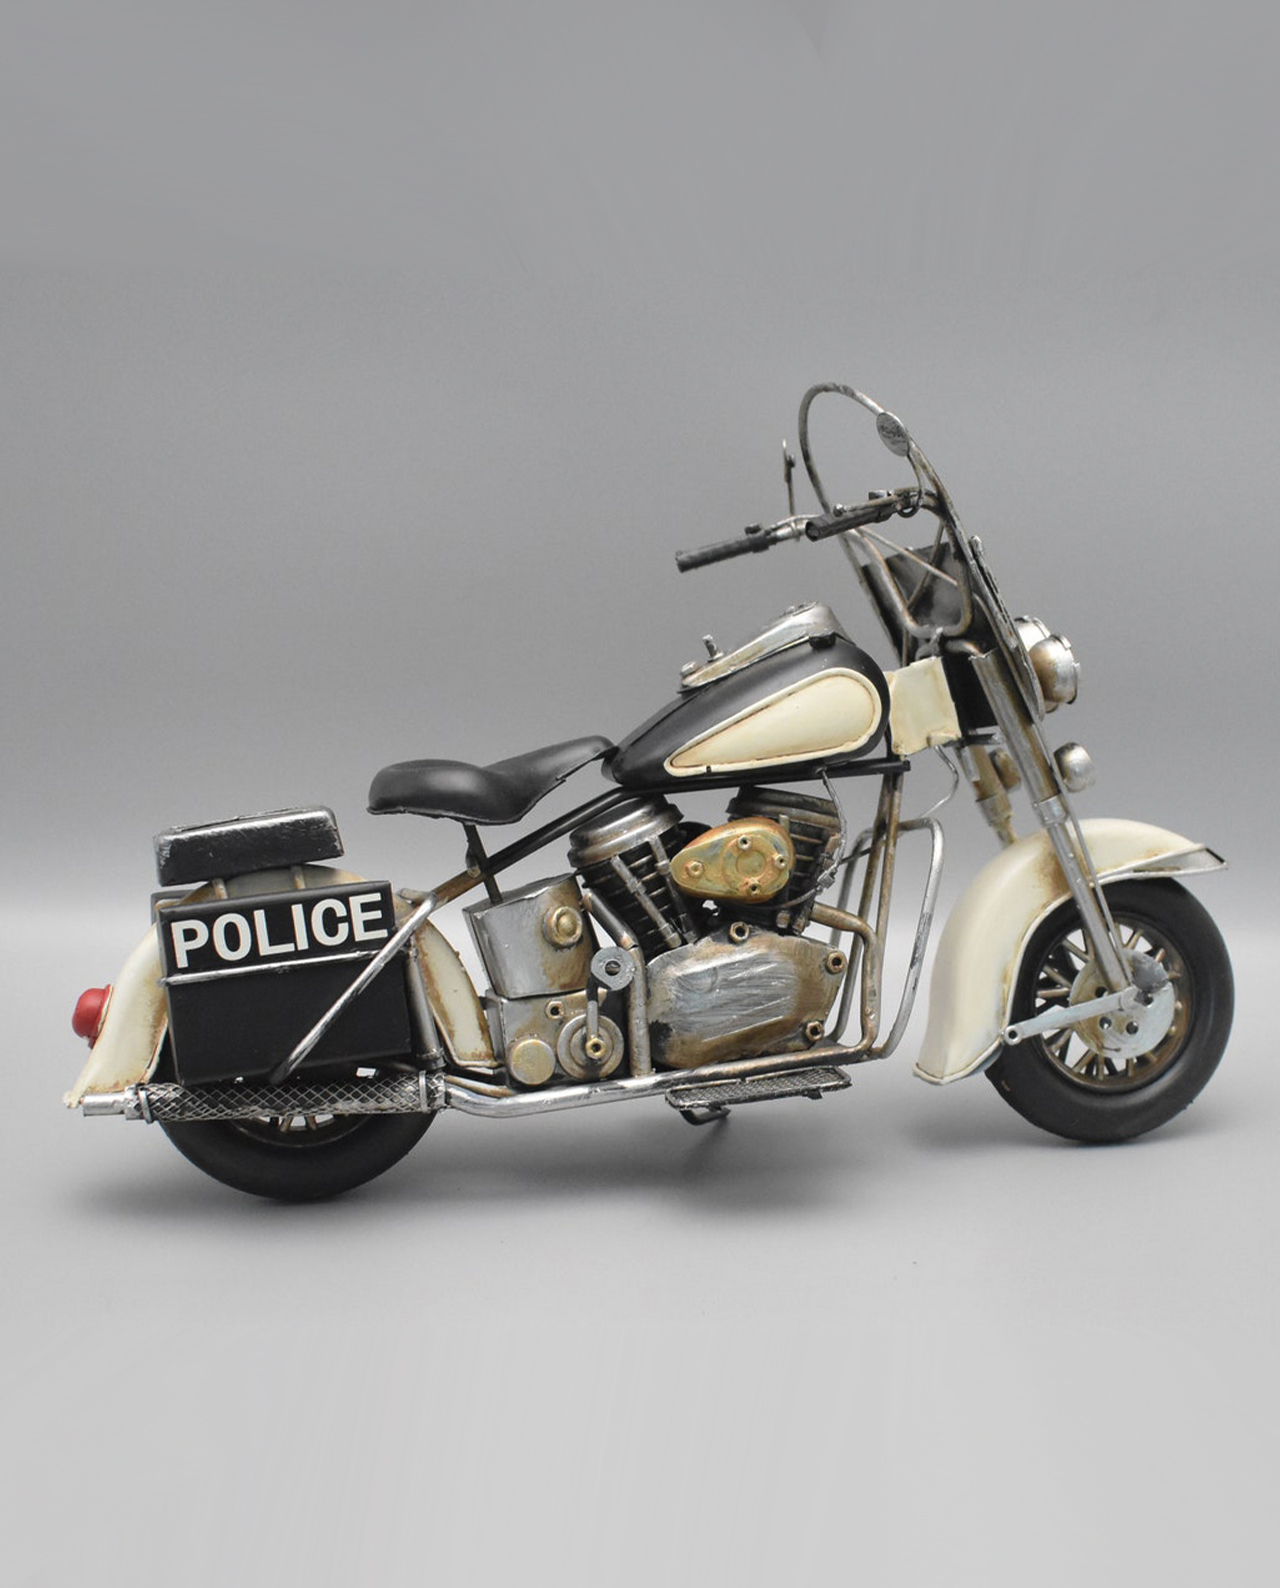 Police Motorcycle Black  White Metal Model, Great Gift for Policeman